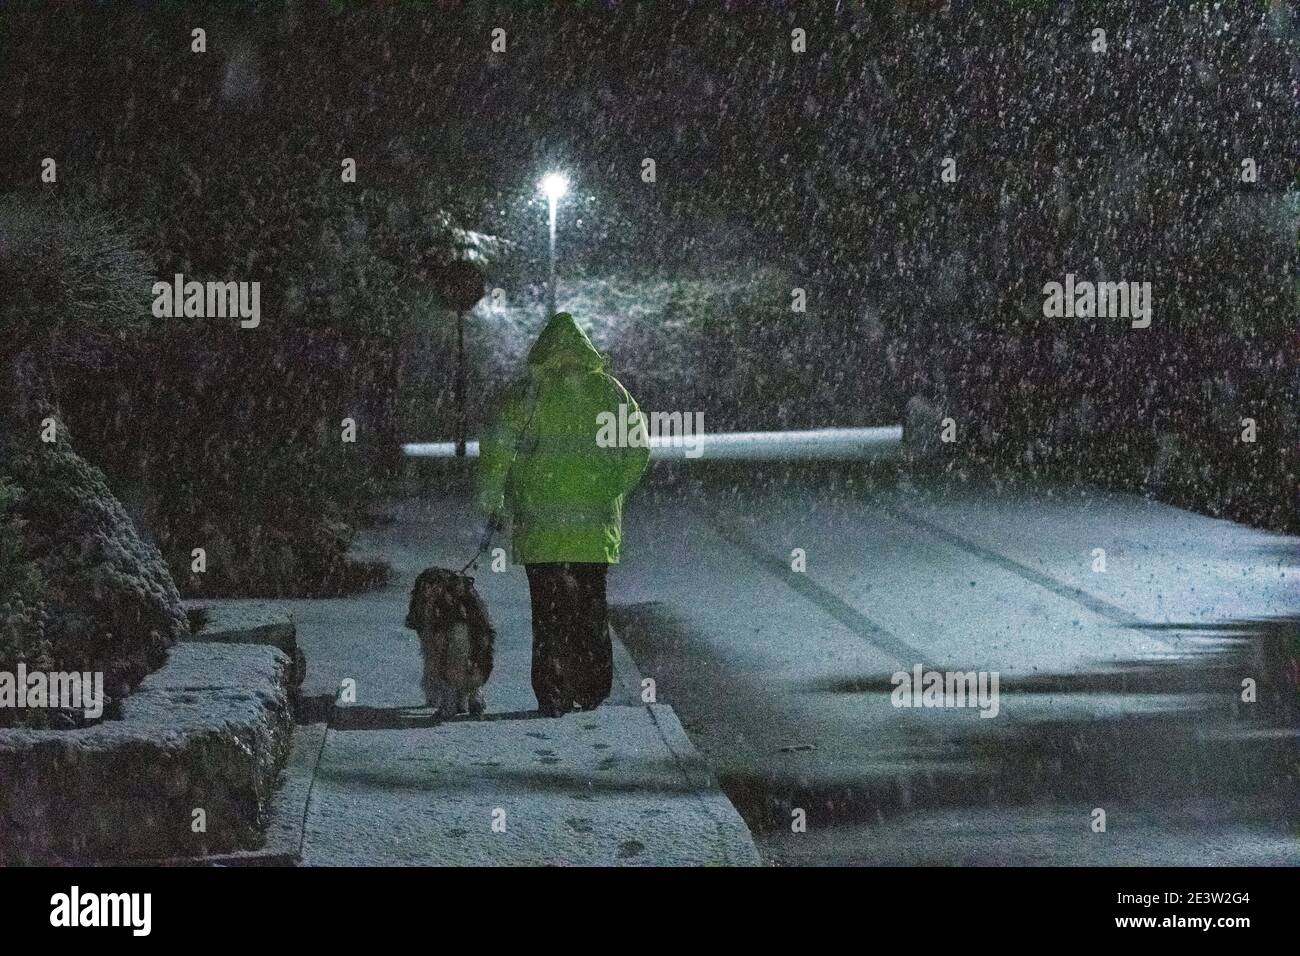 Flintshire, North Wales, UK Wednesday 20th January 2021, UK Weather:  After a day of torrential rain now Storm Christoph is now blanketing the area in heavy snow in Flintshire, North Wales with hours of snowfall expected through the night. Heavy snowfall as Storm Christoph passes through Lixwm Village in Flintshire as this dog walker discovered this evening.   © DGDImages/Alamy Live News Stock Photo